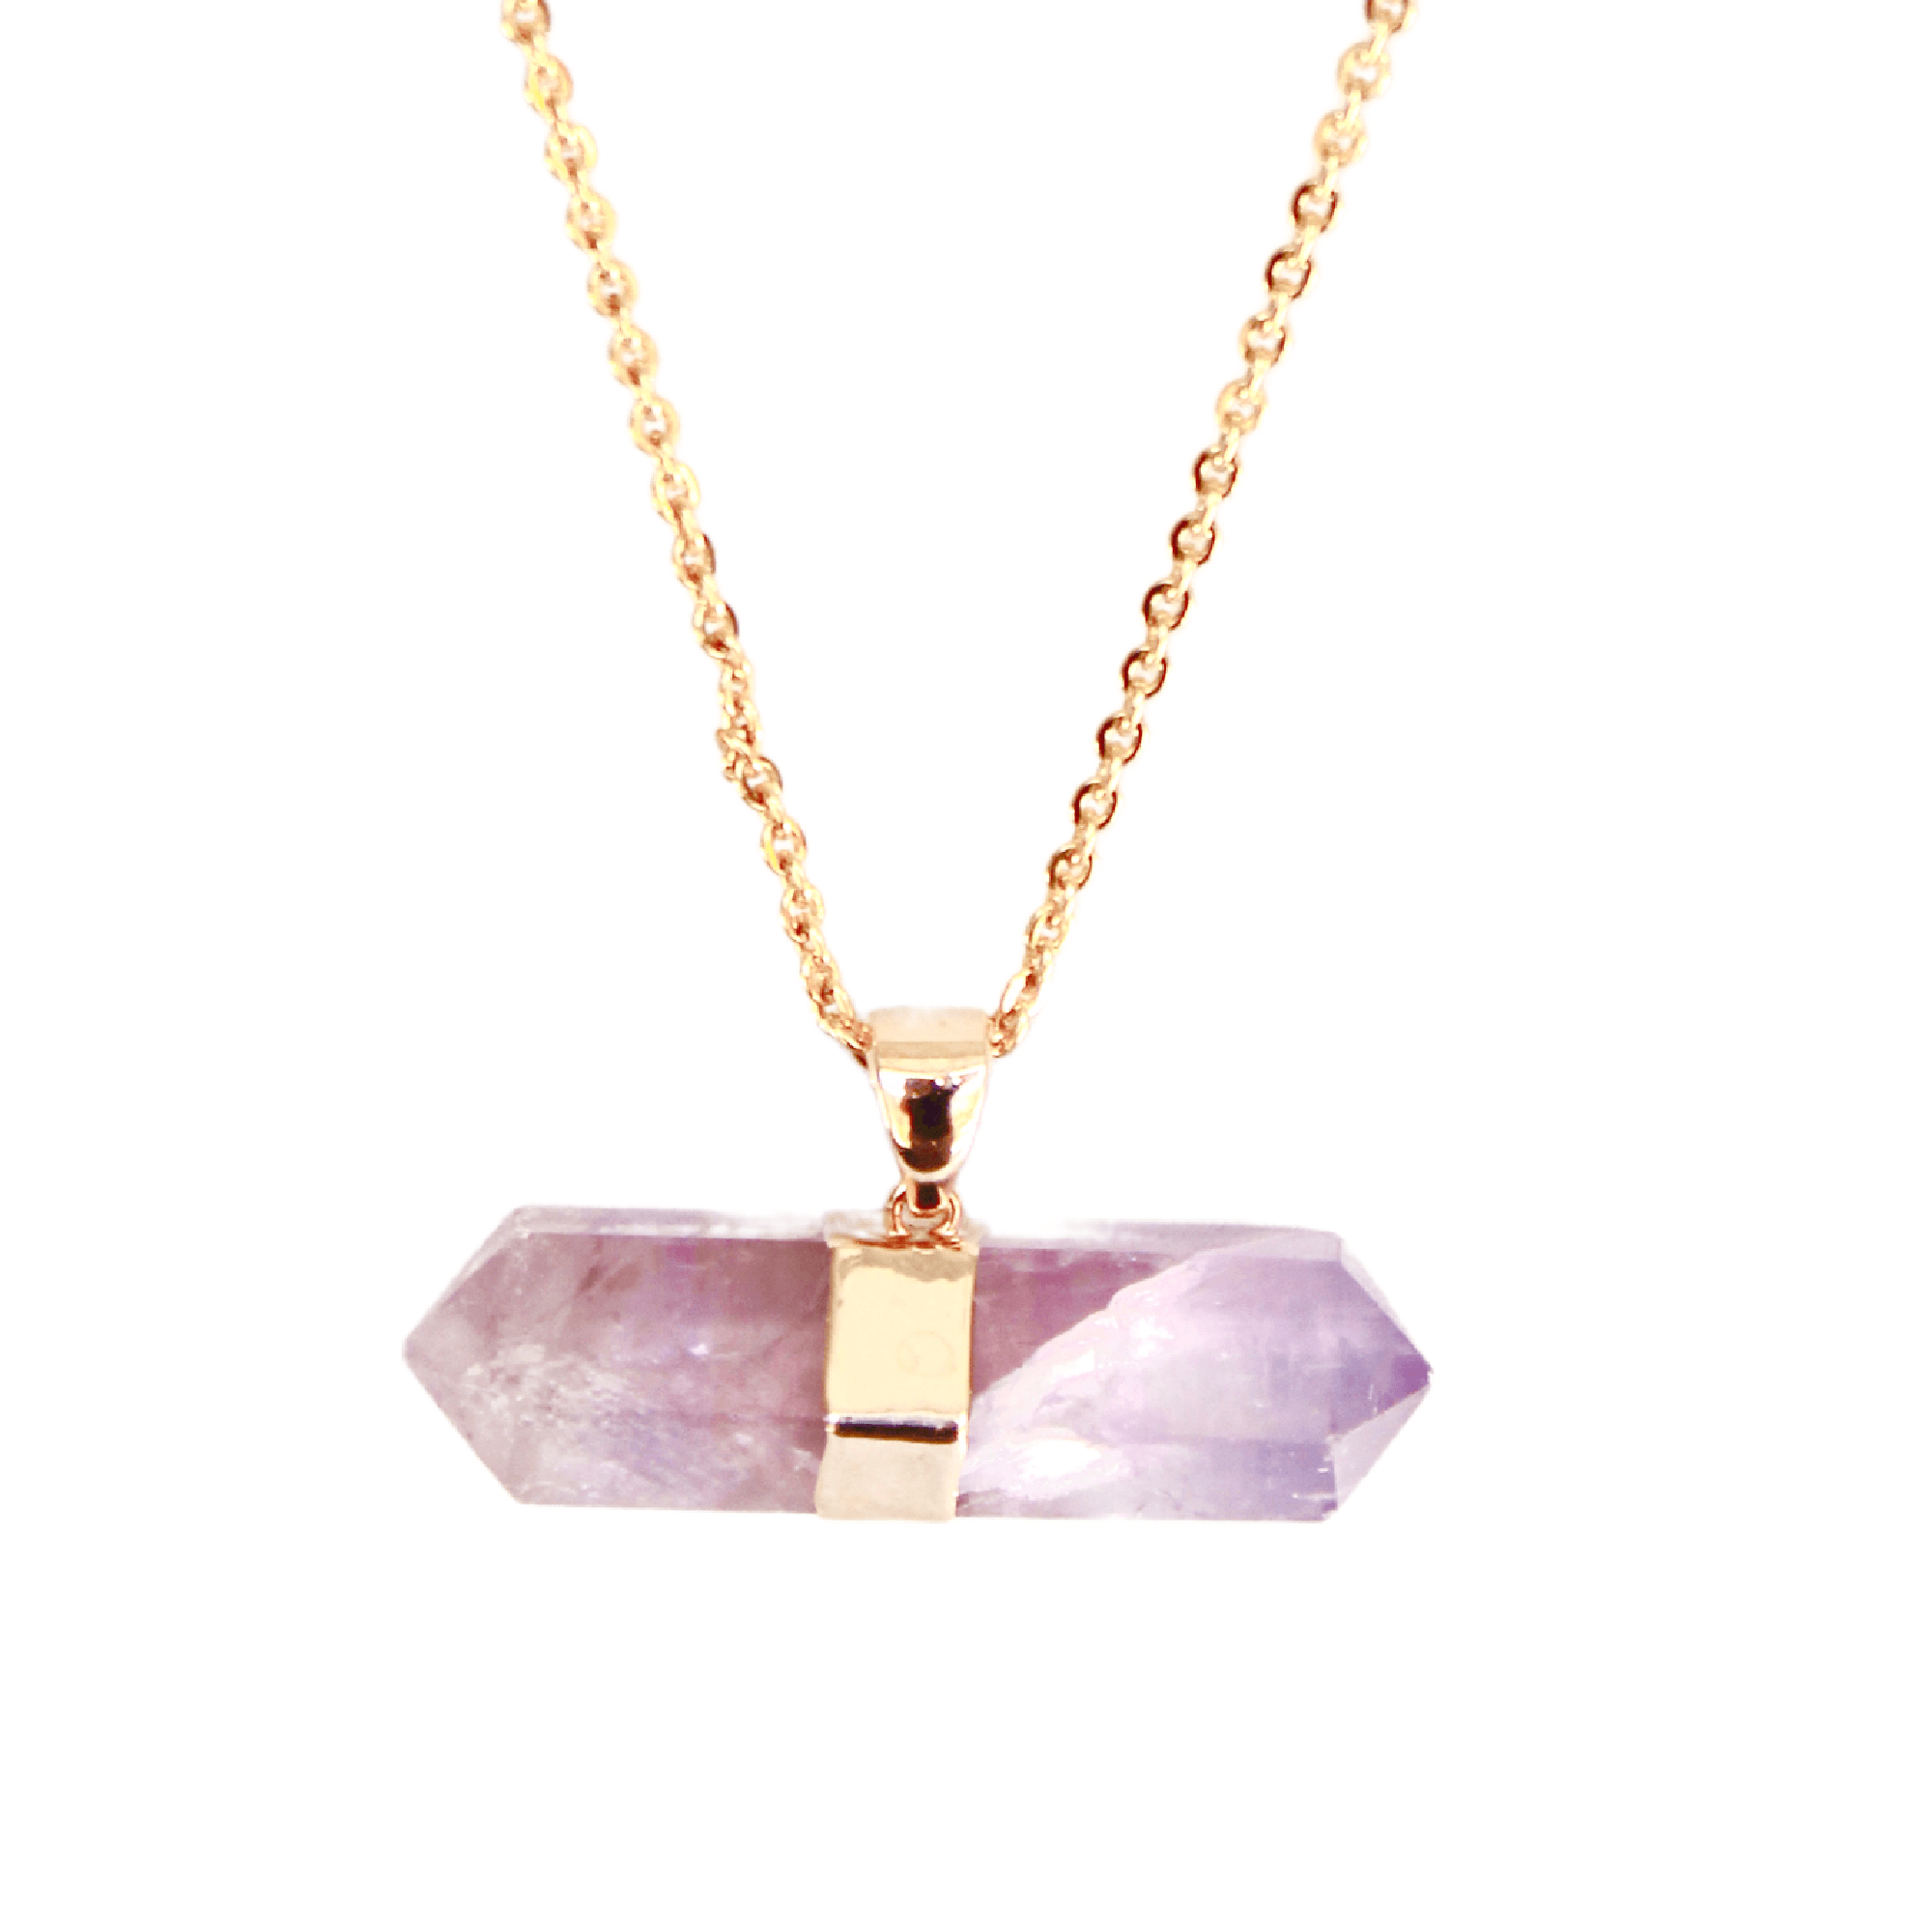 DOUBLE TERMINATED AMETHYST NECKLACE - Energy Wicks